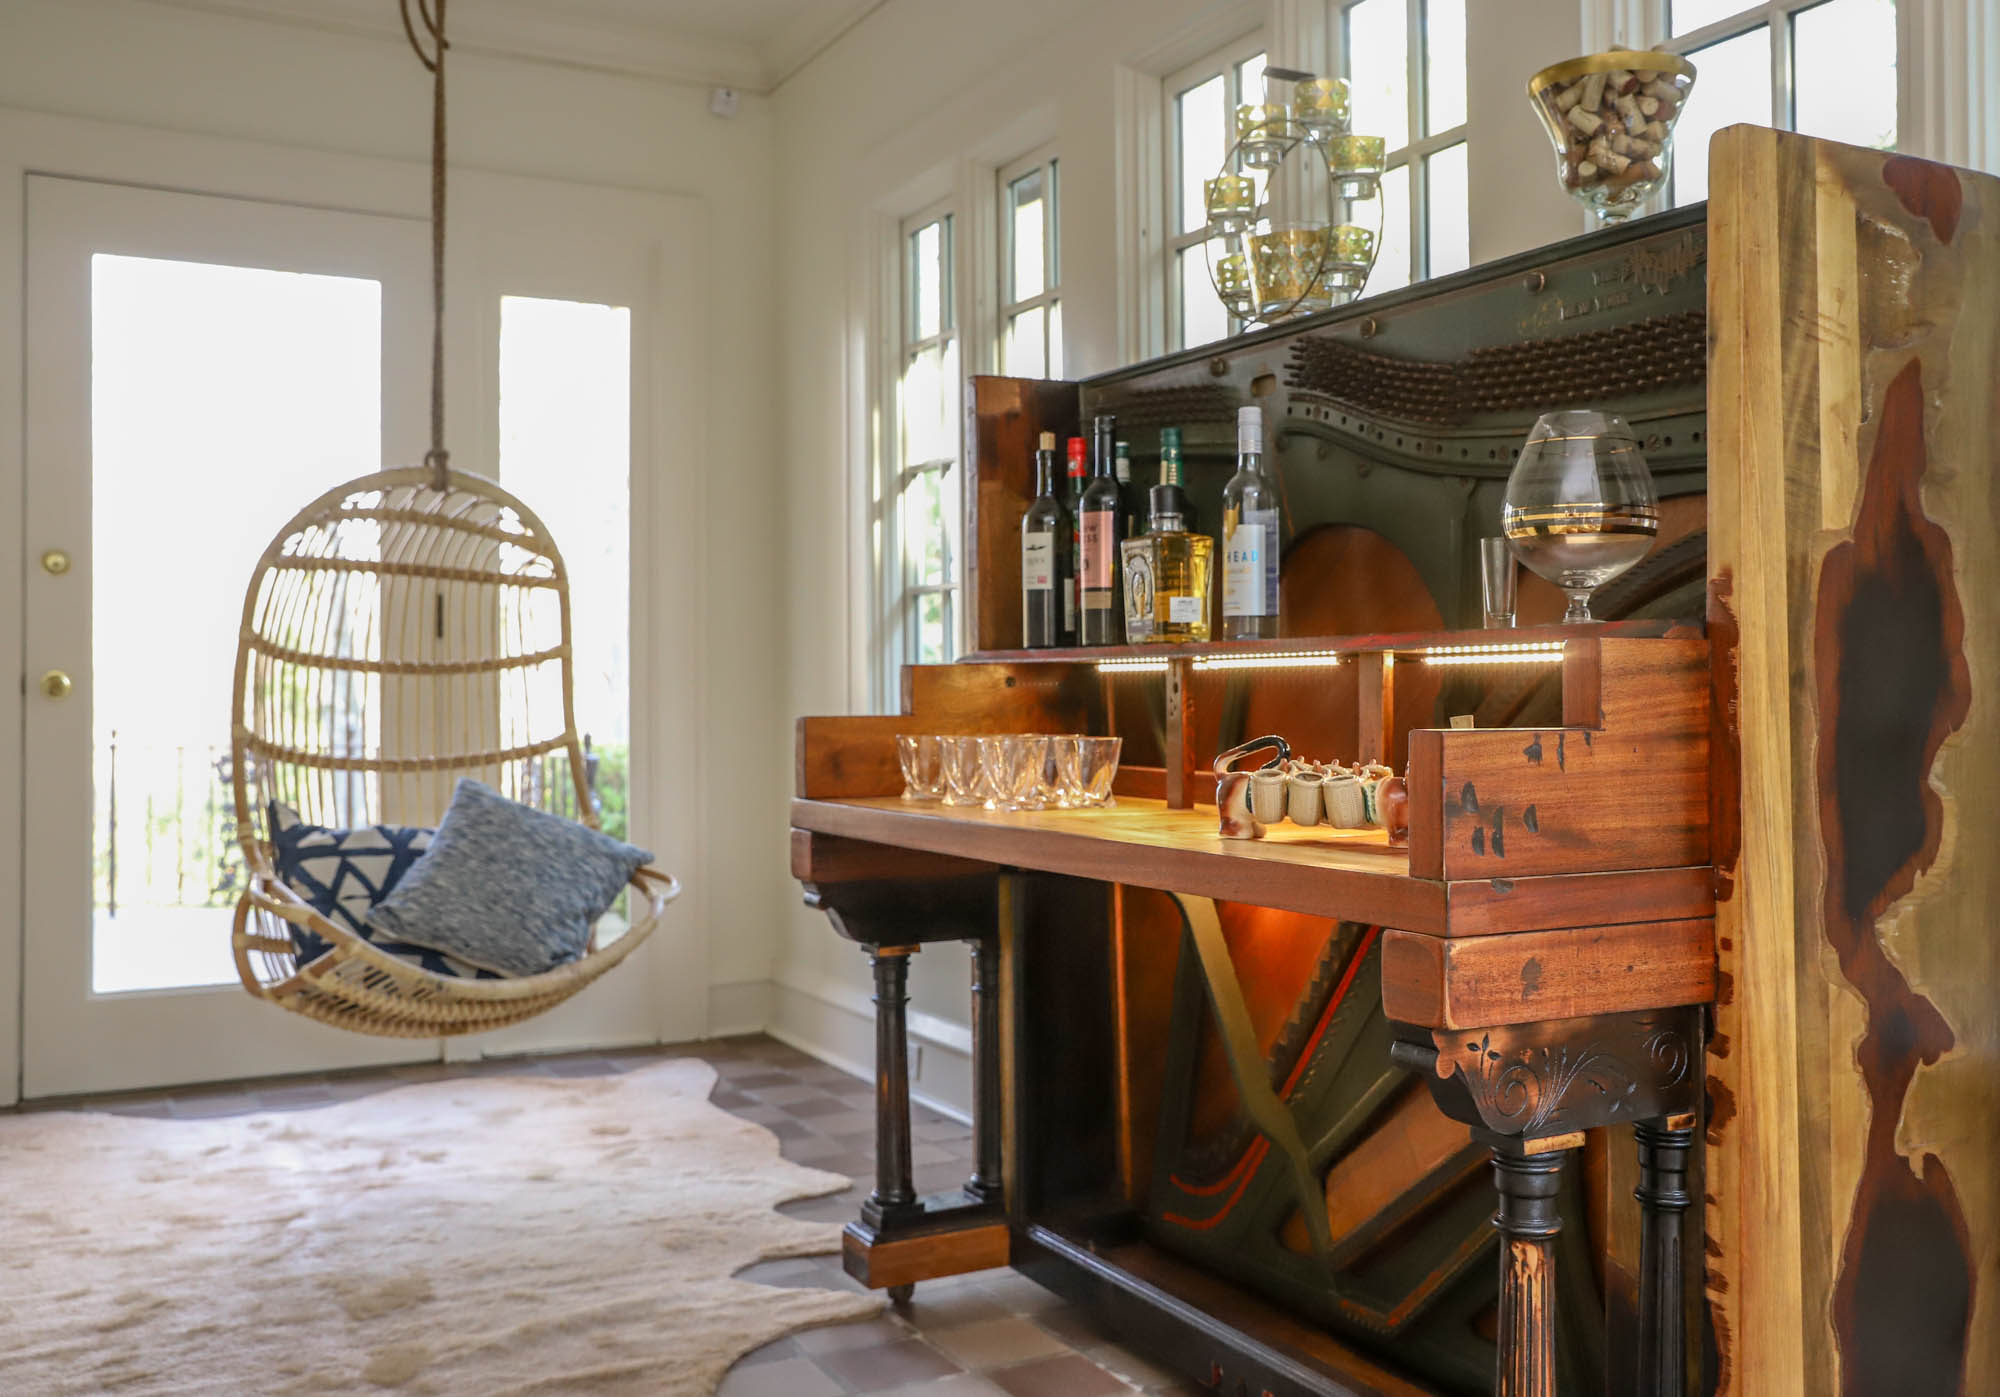 Home Bar Designs That are Ready for Happy Hour